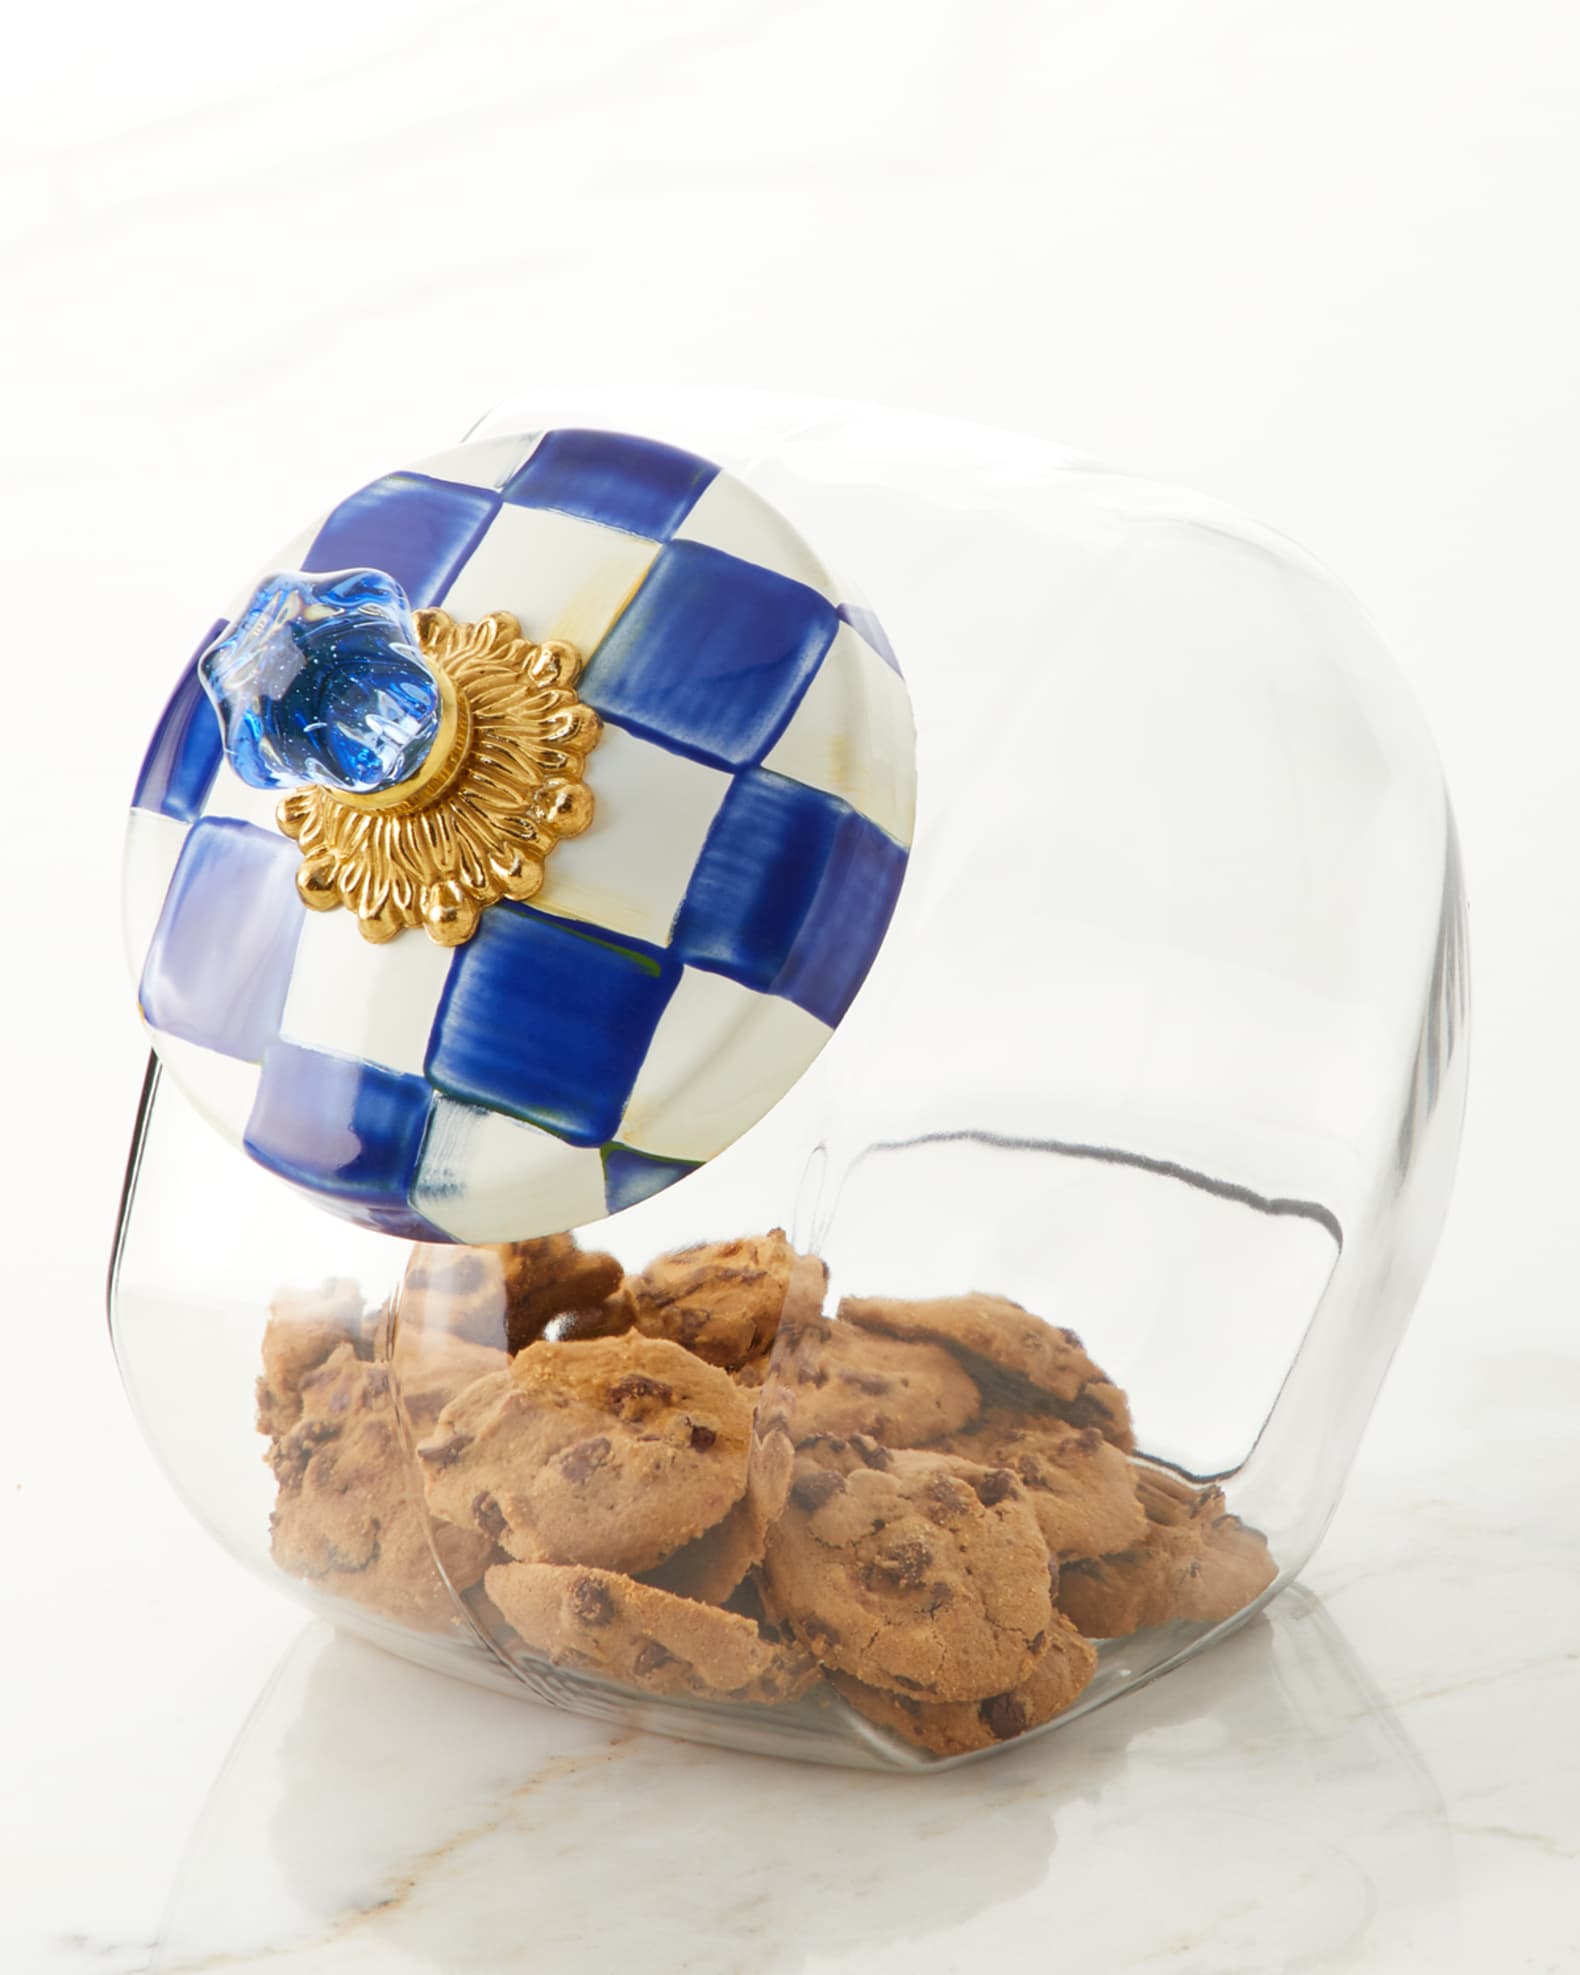 MacKenzie-Childs Cookie Jar with Royal Check Enamel Lid